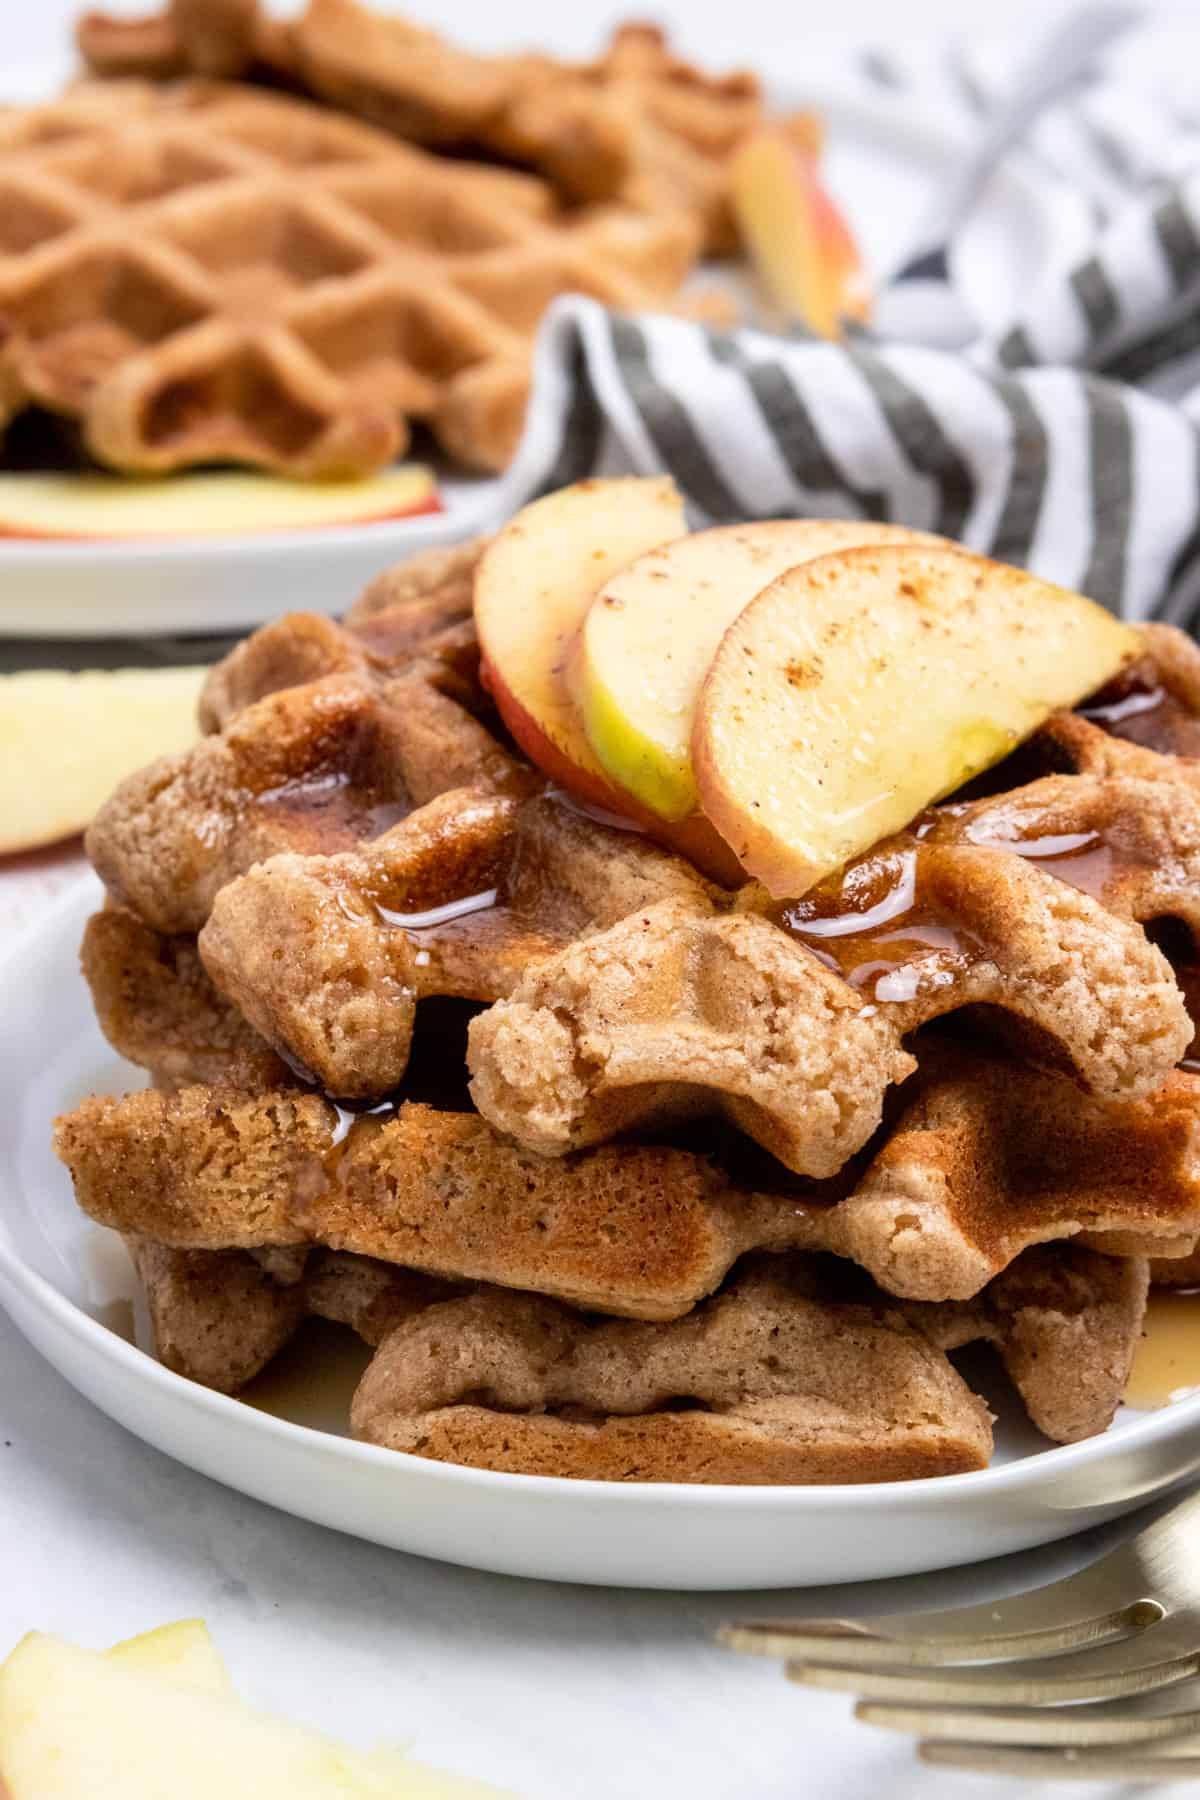 Stack of waffles with apples on top.